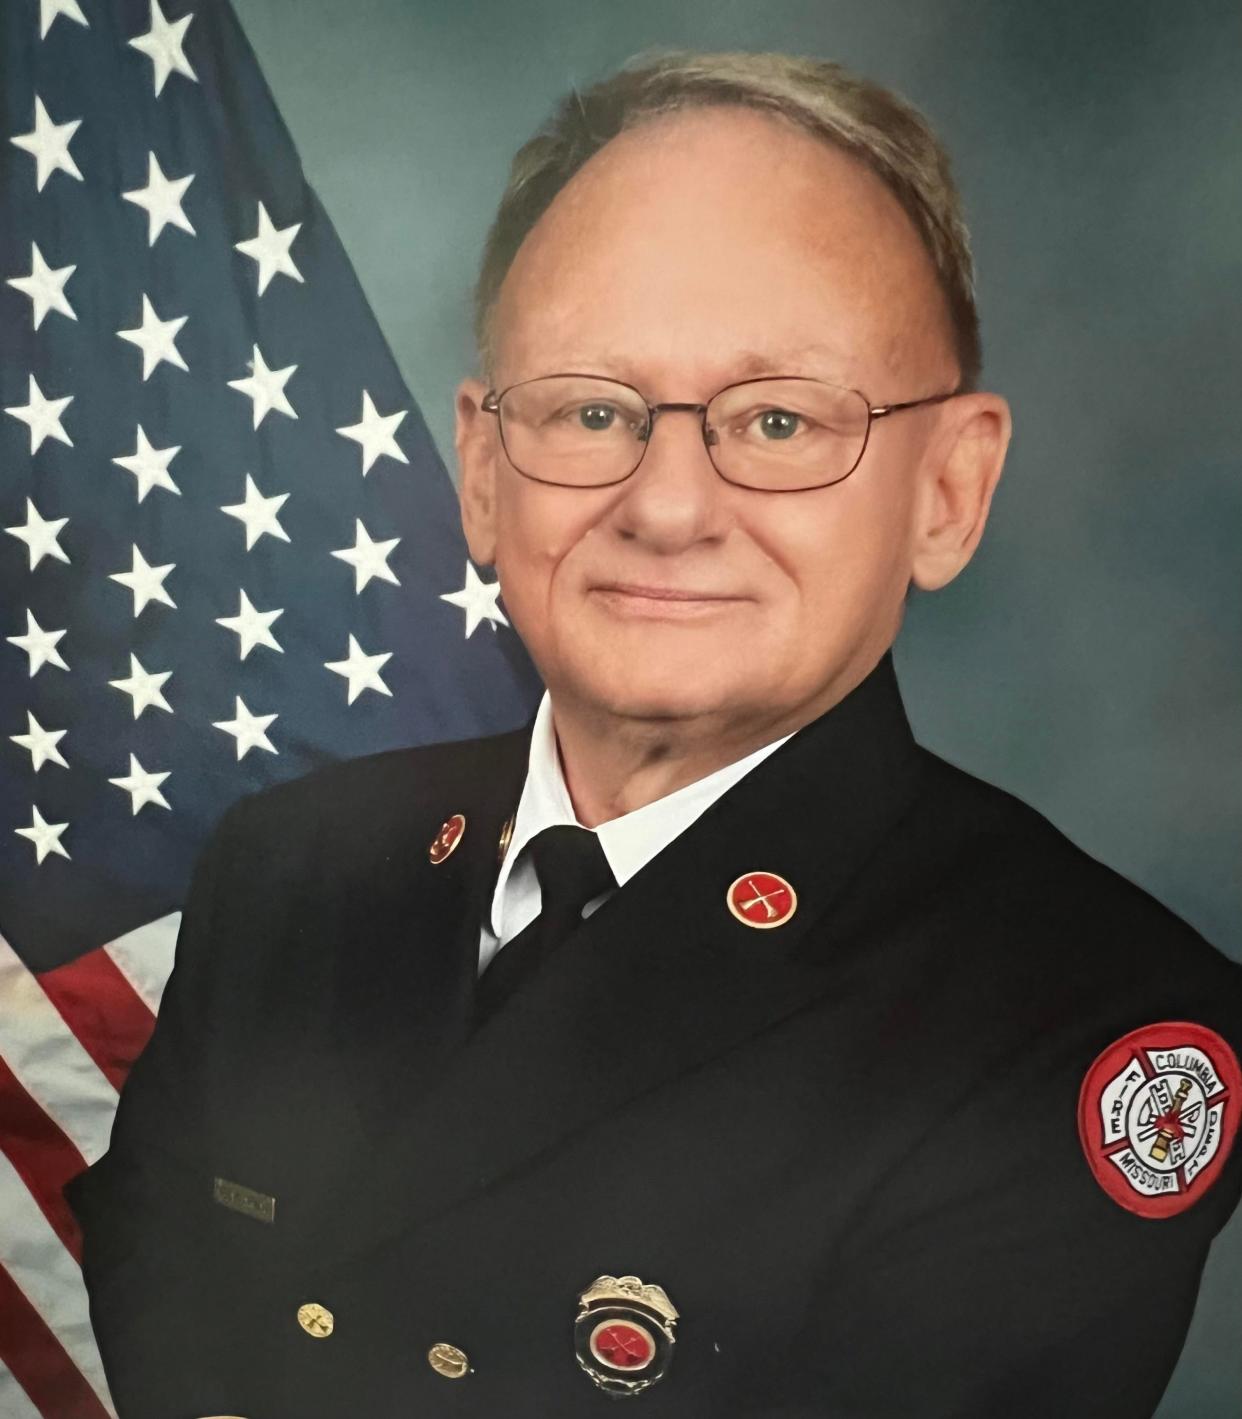 Michael Arnhart was selected Wednesday to serve as interim Columbia fire chief, starting April 1.